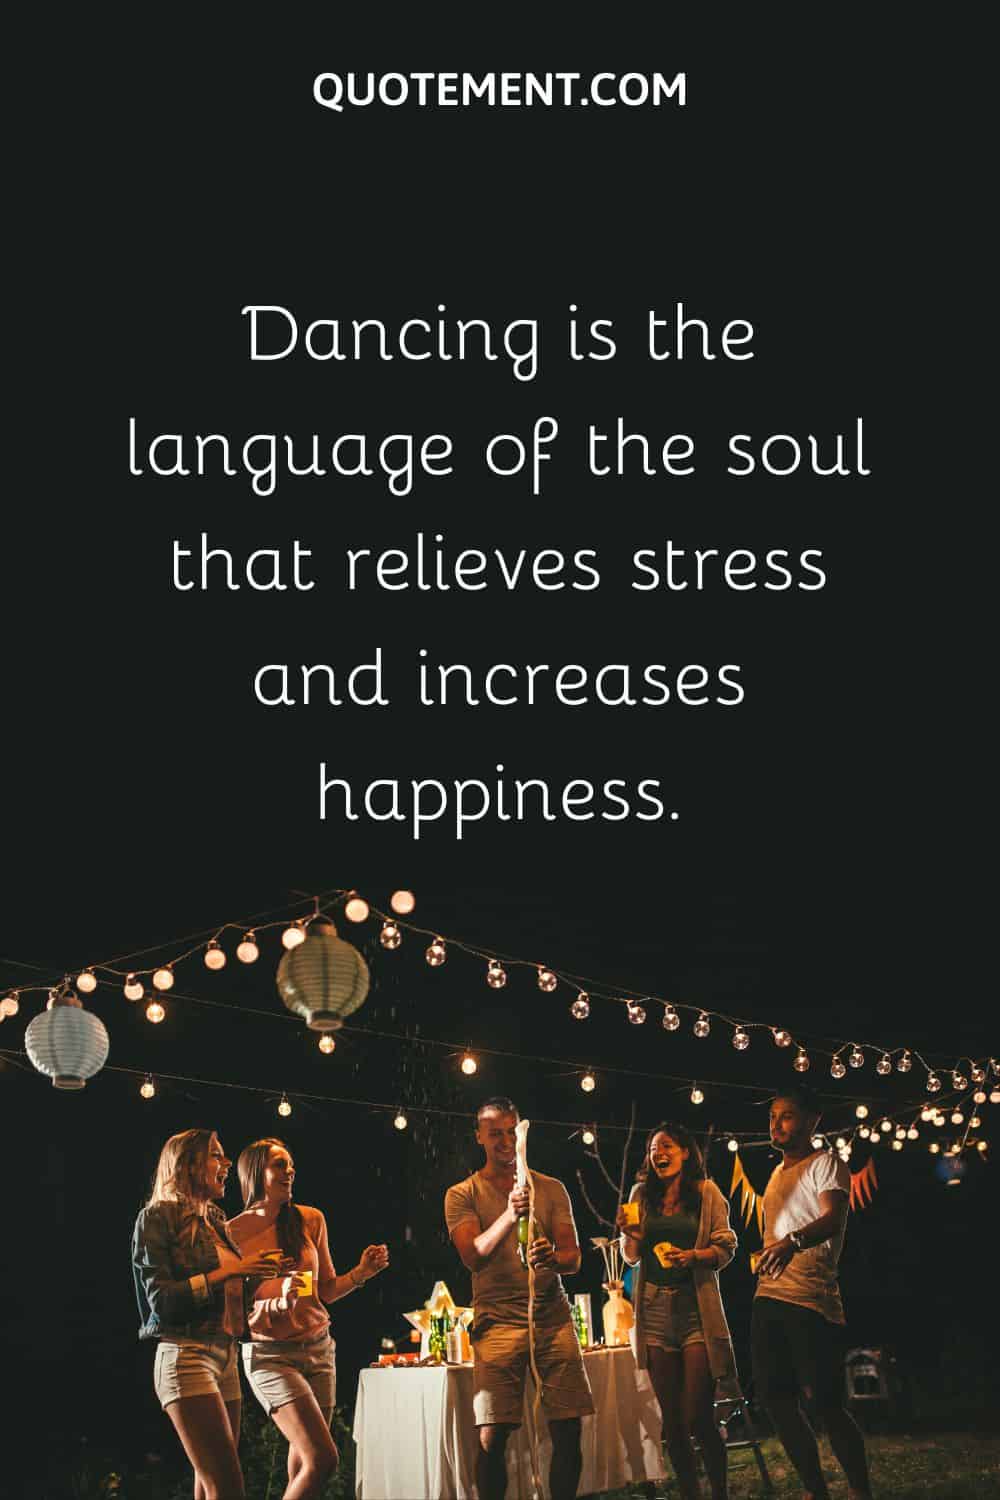 Dancing is the language of the soul that relieves stress and increases happiness